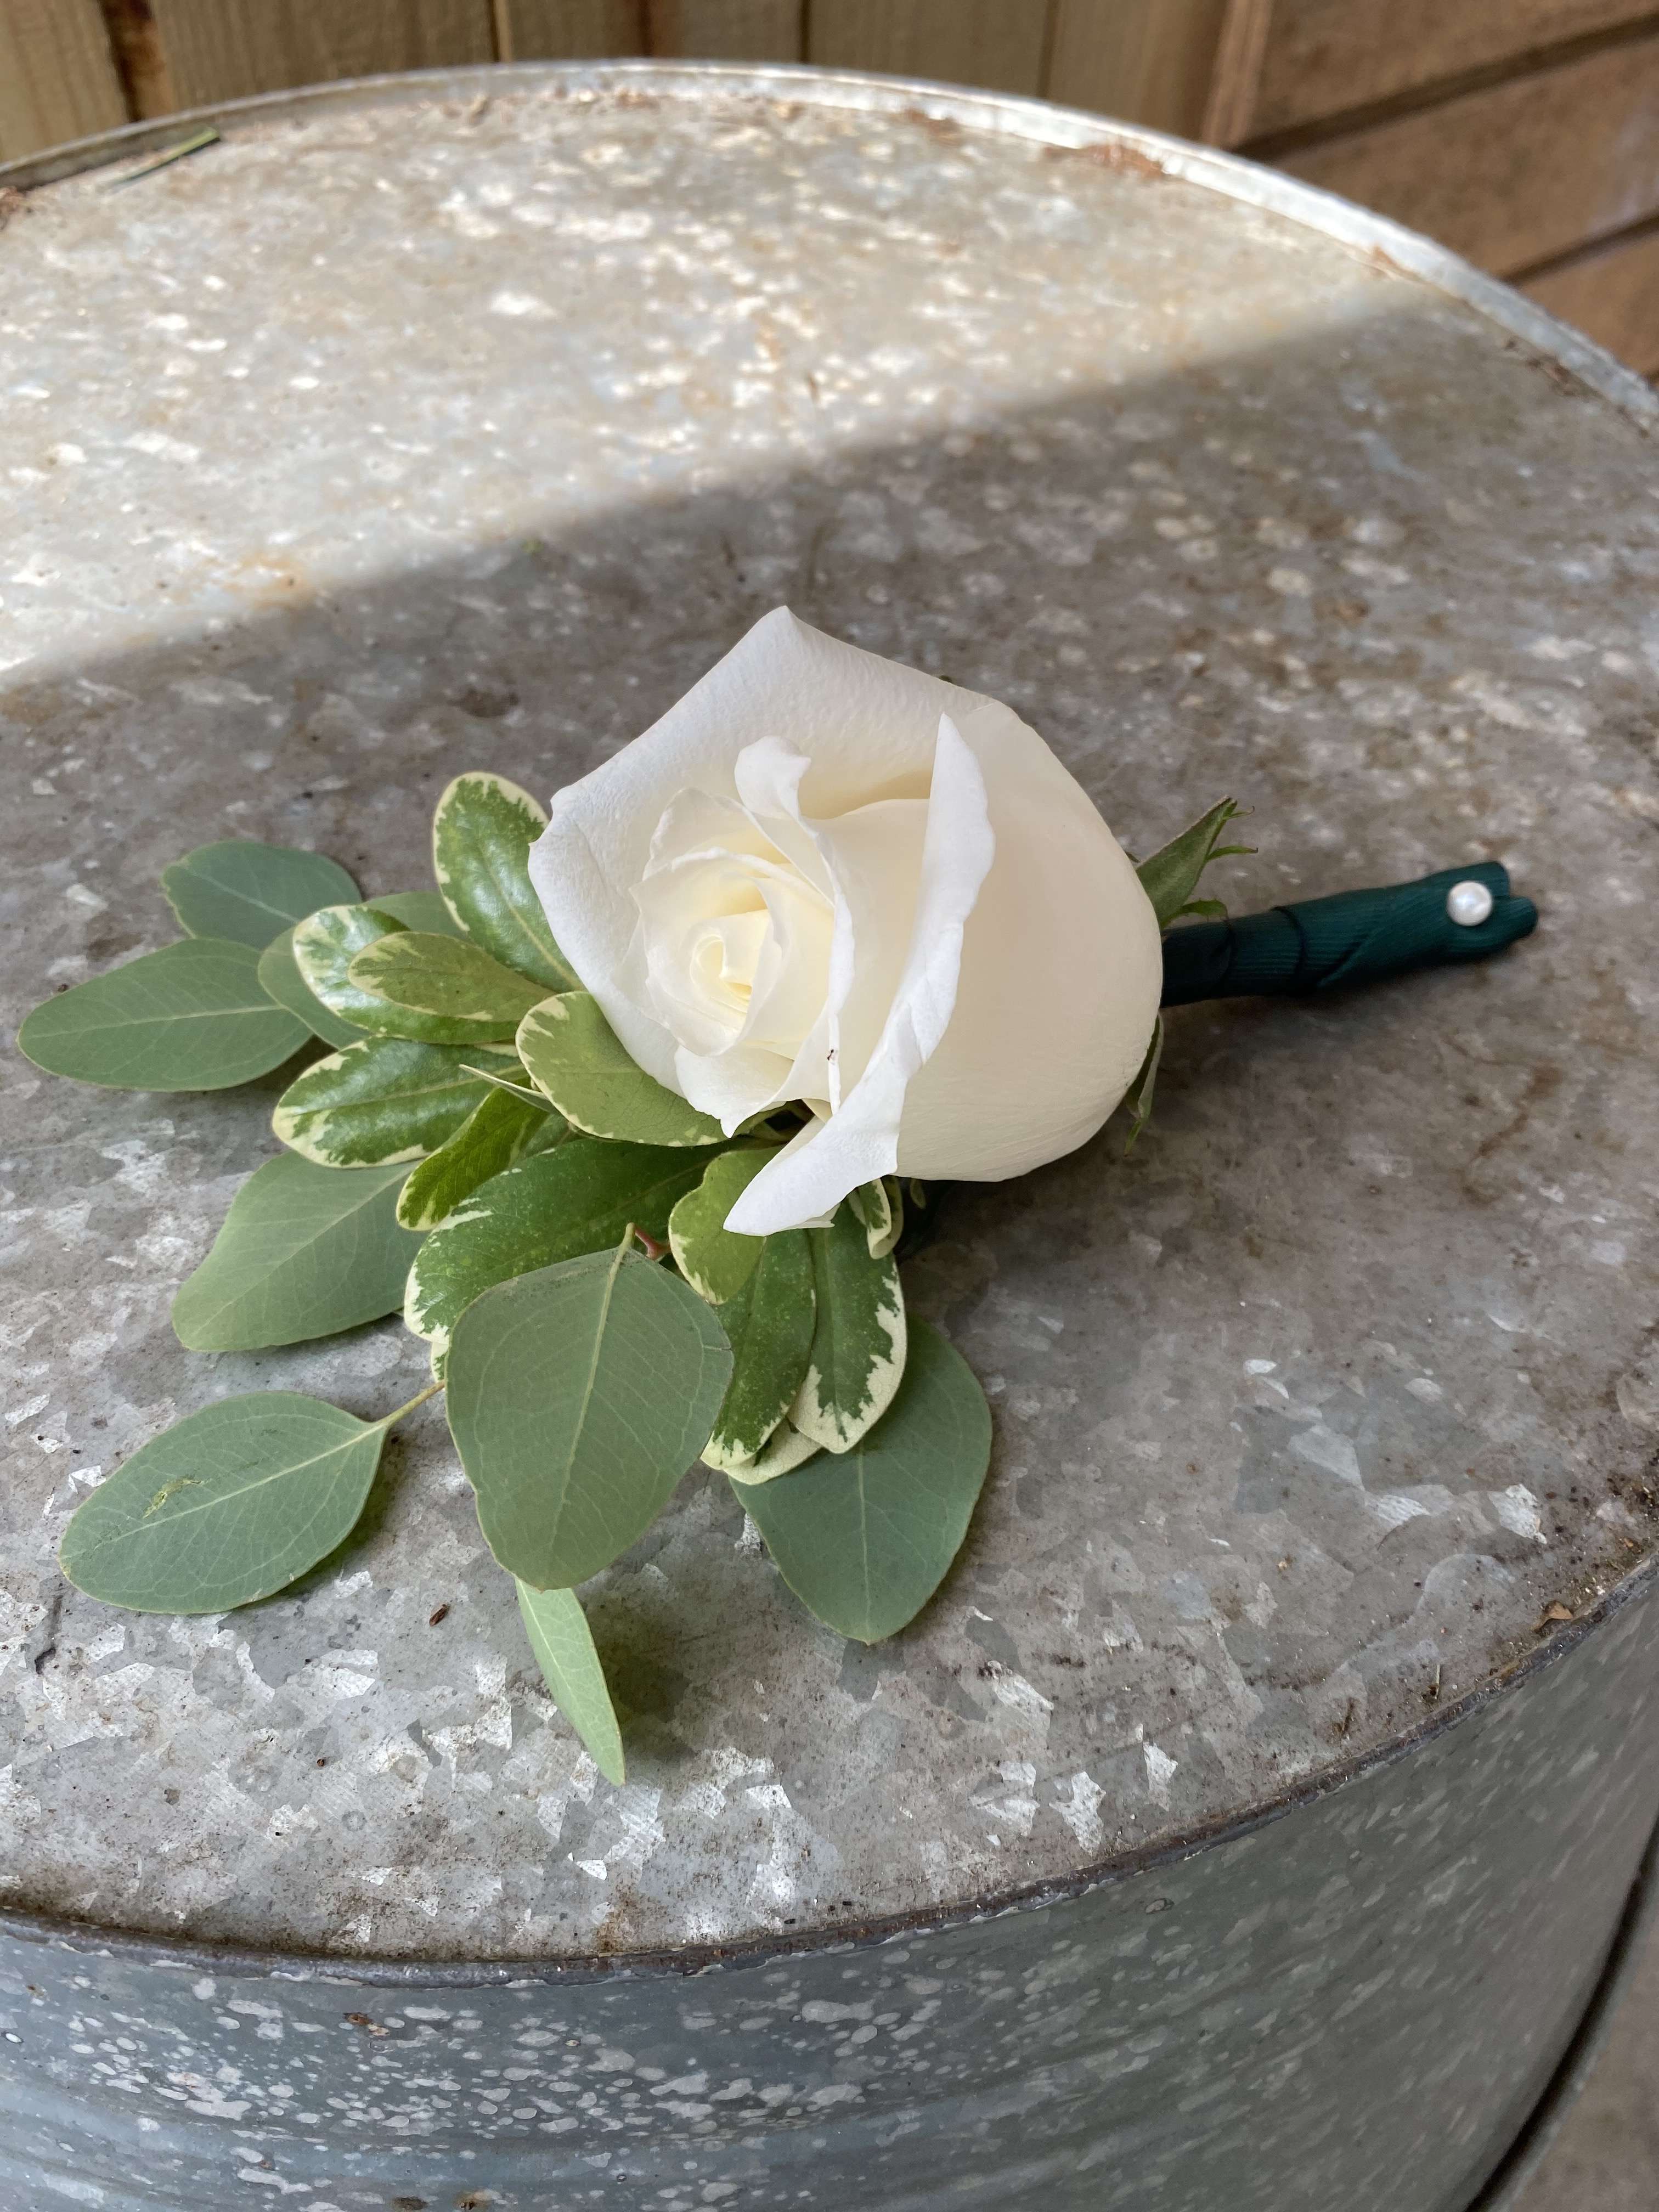 SR Custom Boutonniere (Exclusive) - All boutonnieres are custom made to order. PLEASE WHEN ORDERING PUT IN NOTES TO SHOP THE FOLLOWING: *Ribbon color/dress color *Jewelry color for accent * Gentlemen's suit or shirt color *Approximate pick up time  